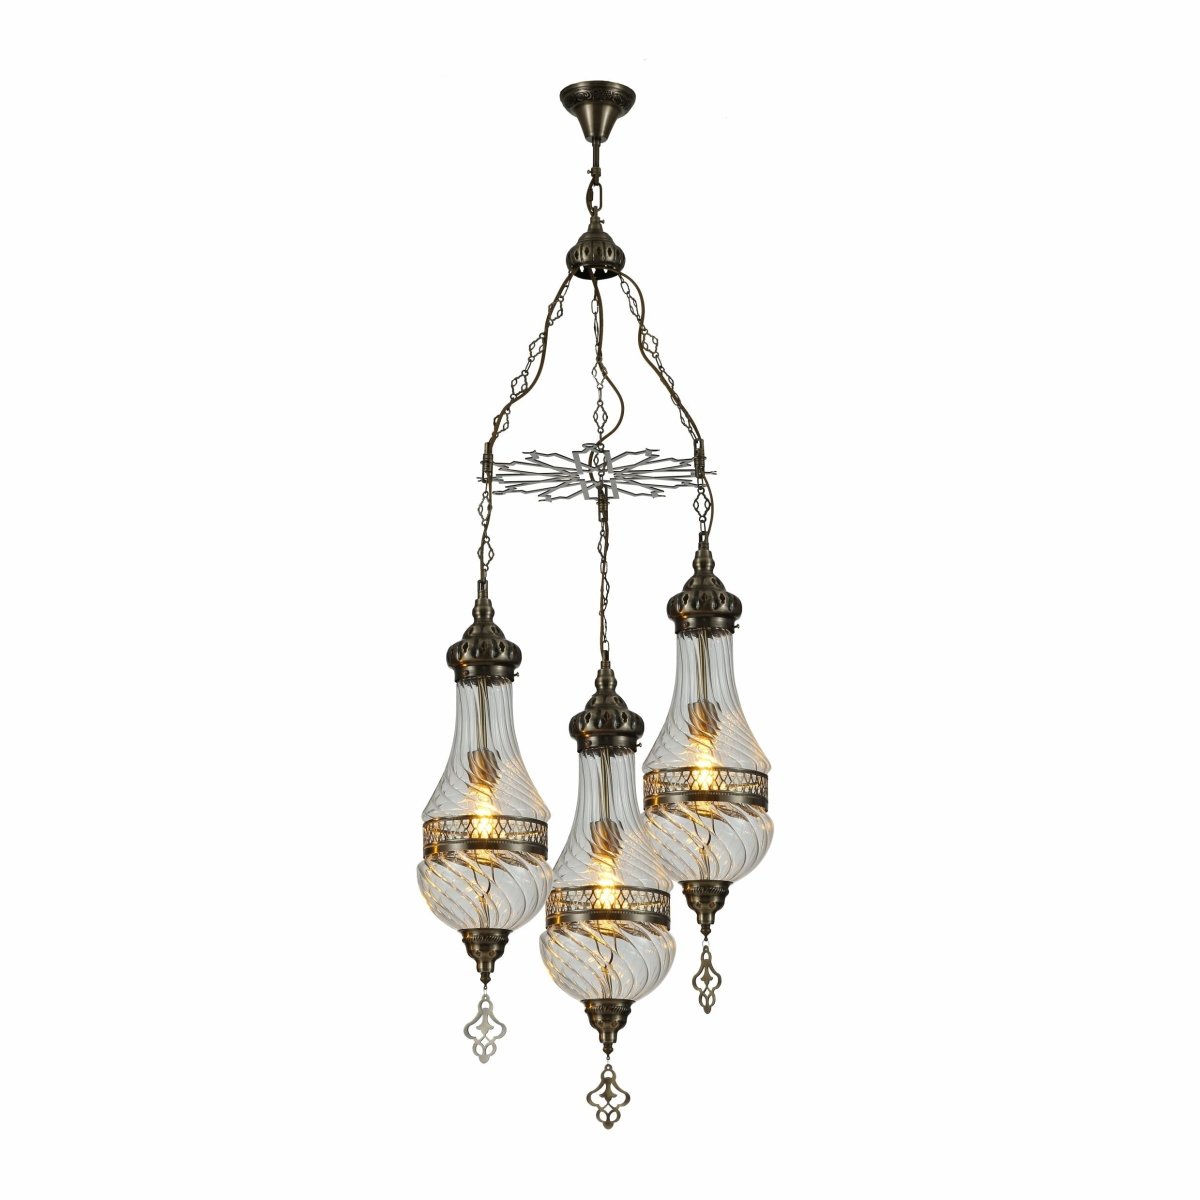 Main image of Moroccan Style Antique Brass and Clear Glass Ceiling Oriental Chandelier with 3xE27 | TEKLED 158-19555